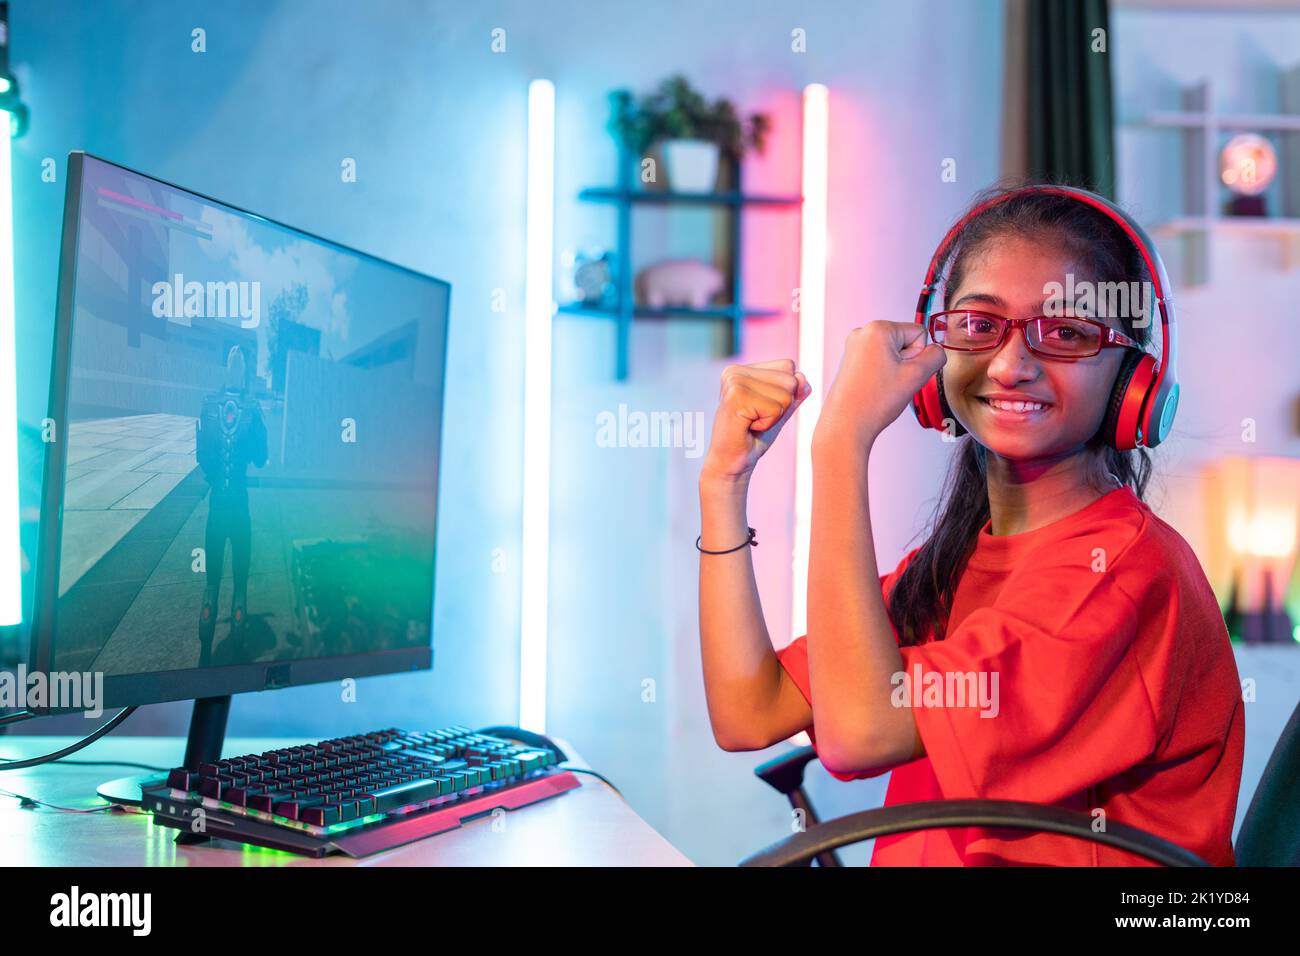 Excited girl with headset celebrating by raising hands while playing live video game on computer by looking at camera - concept of social media Stock Photo